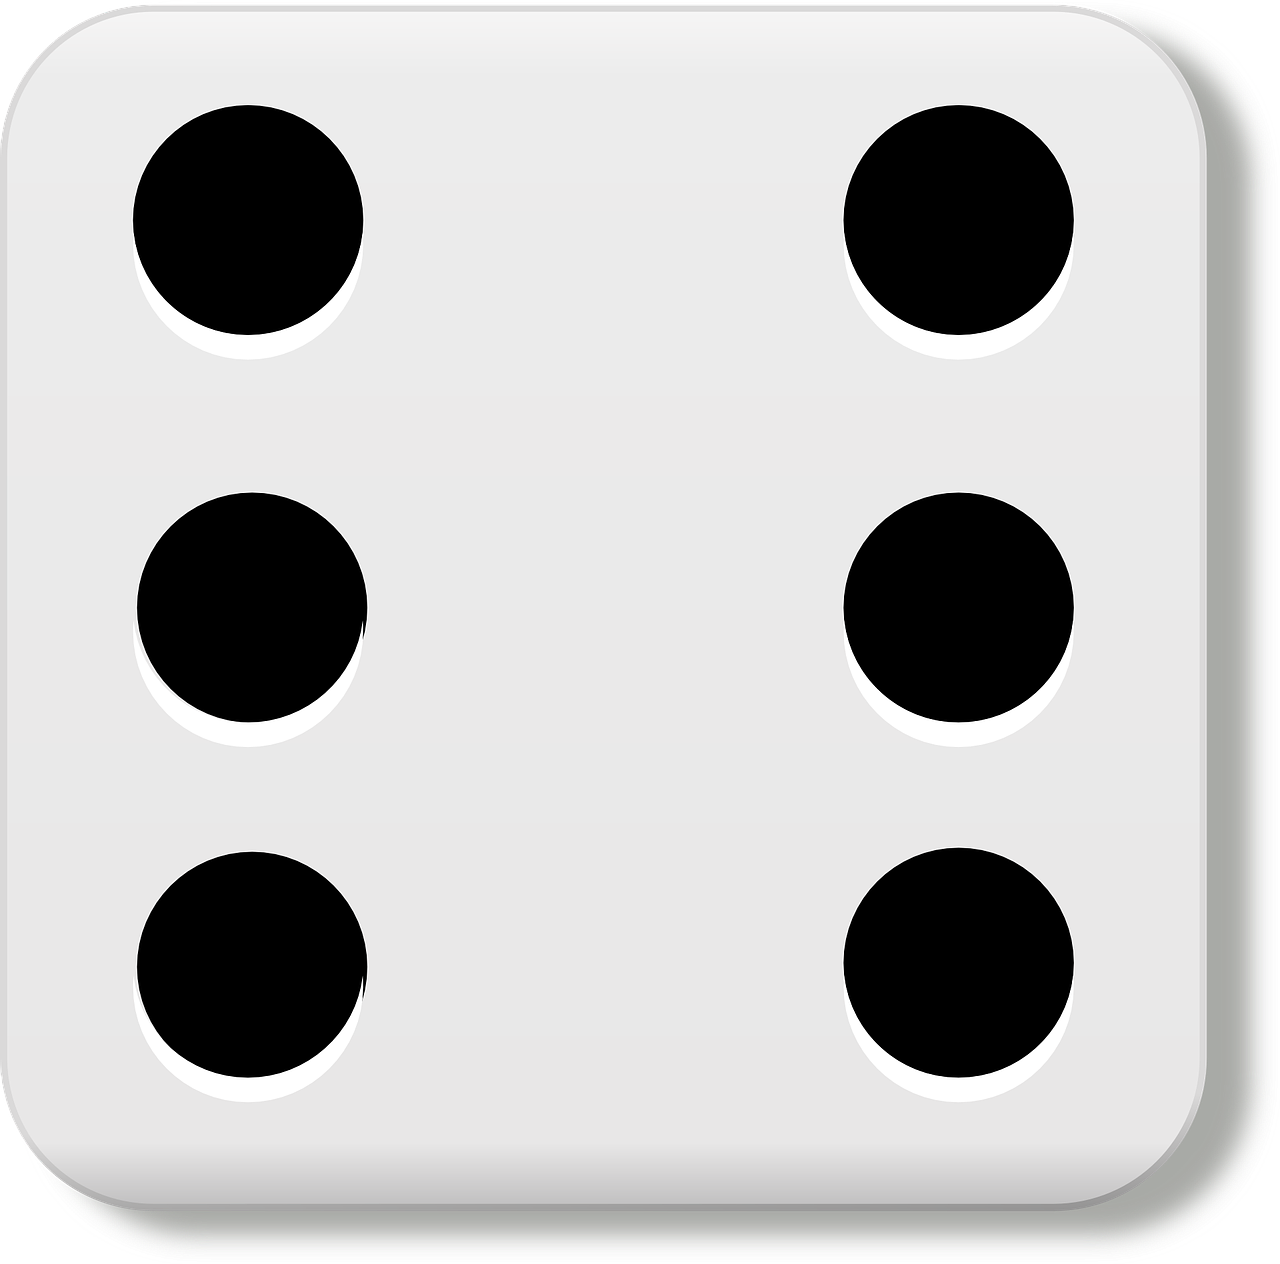 Dice Six Eyes Gamble Luck PNG | Picpng